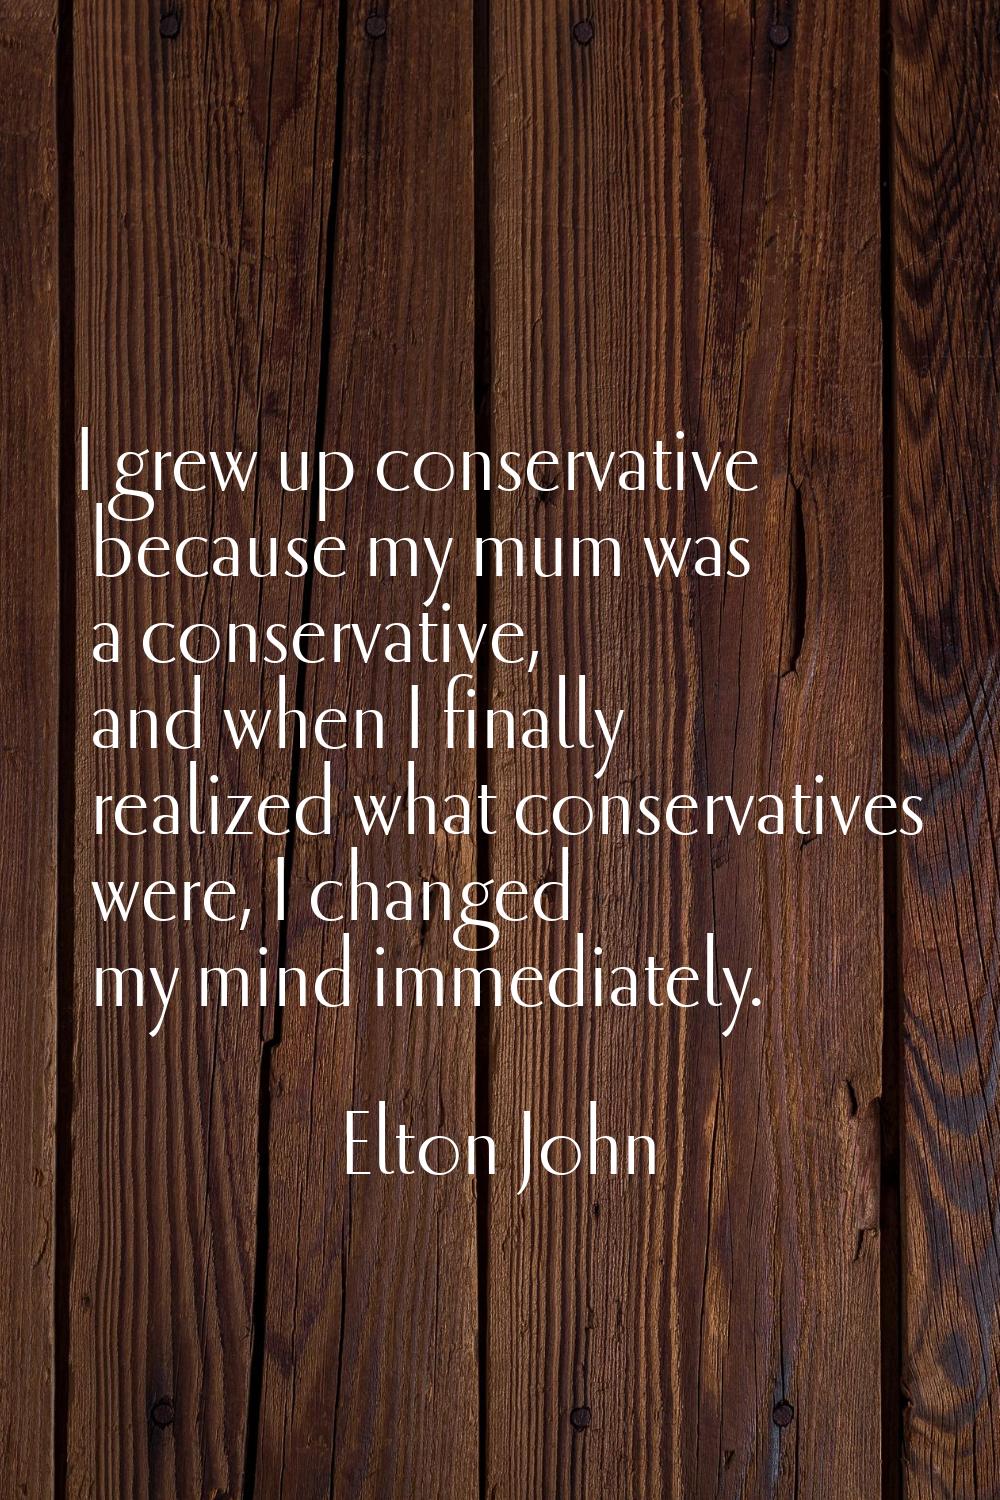 I grew up conservative because my mum was a conservative, and when I finally realized what conserva